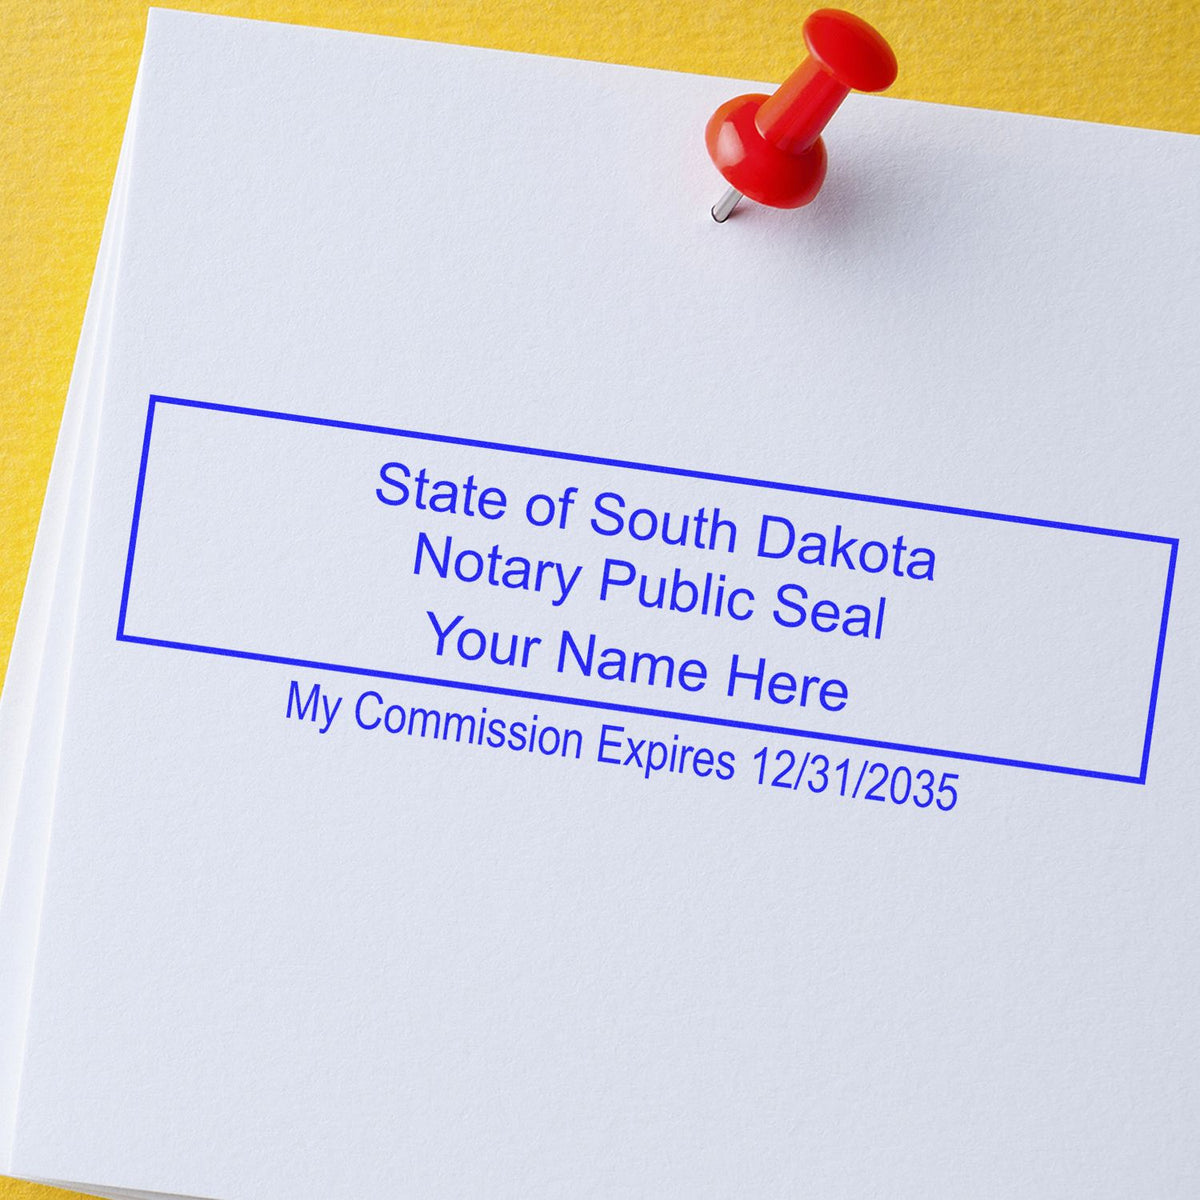 A photograph of the Heavy-Duty South Dakota Rectangular Notary Stamp stamp impression reveals a vivid, professional image of the on paper.